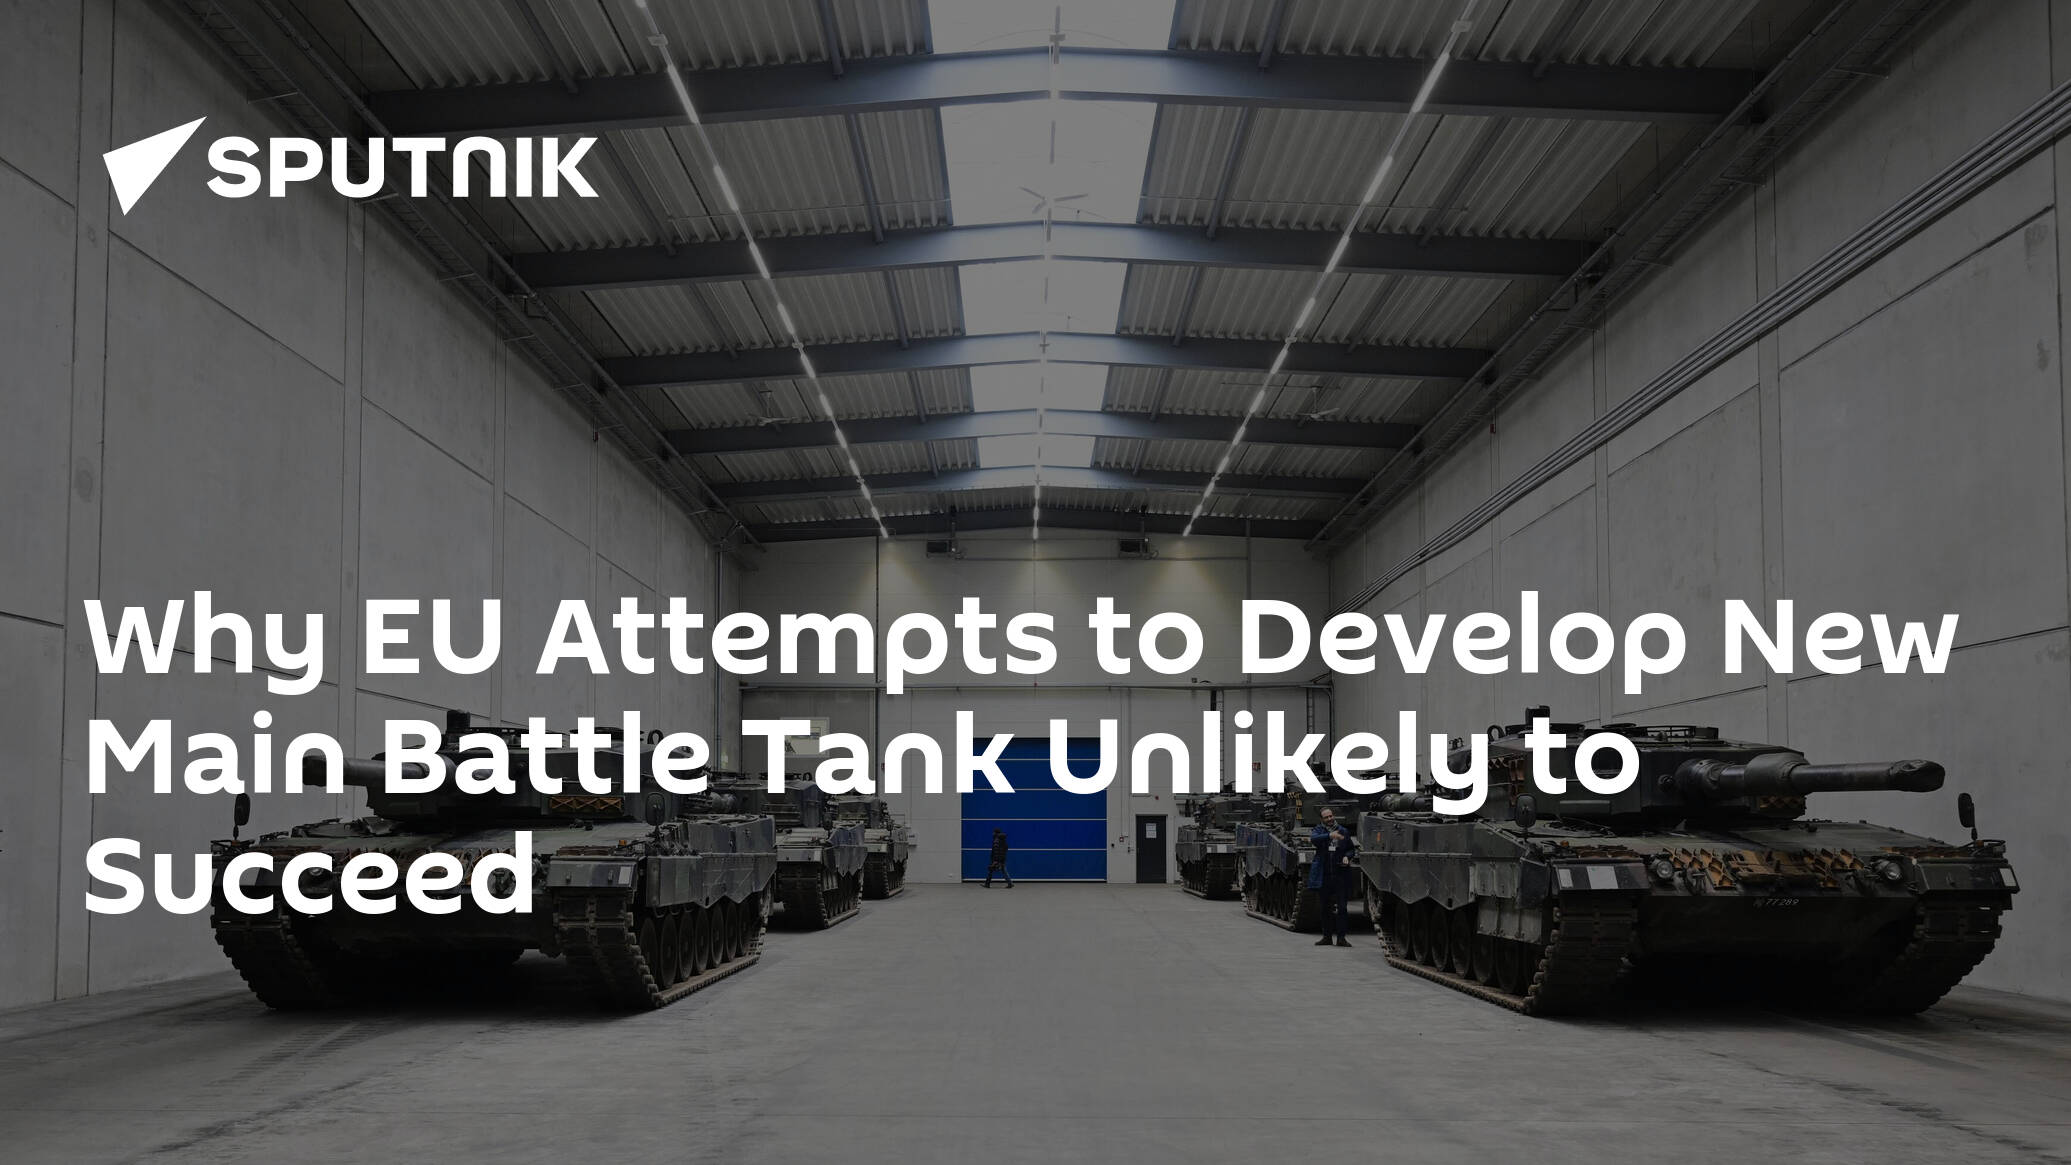 Why EU Attempts to Develop New Main Battle Tank Unlikely